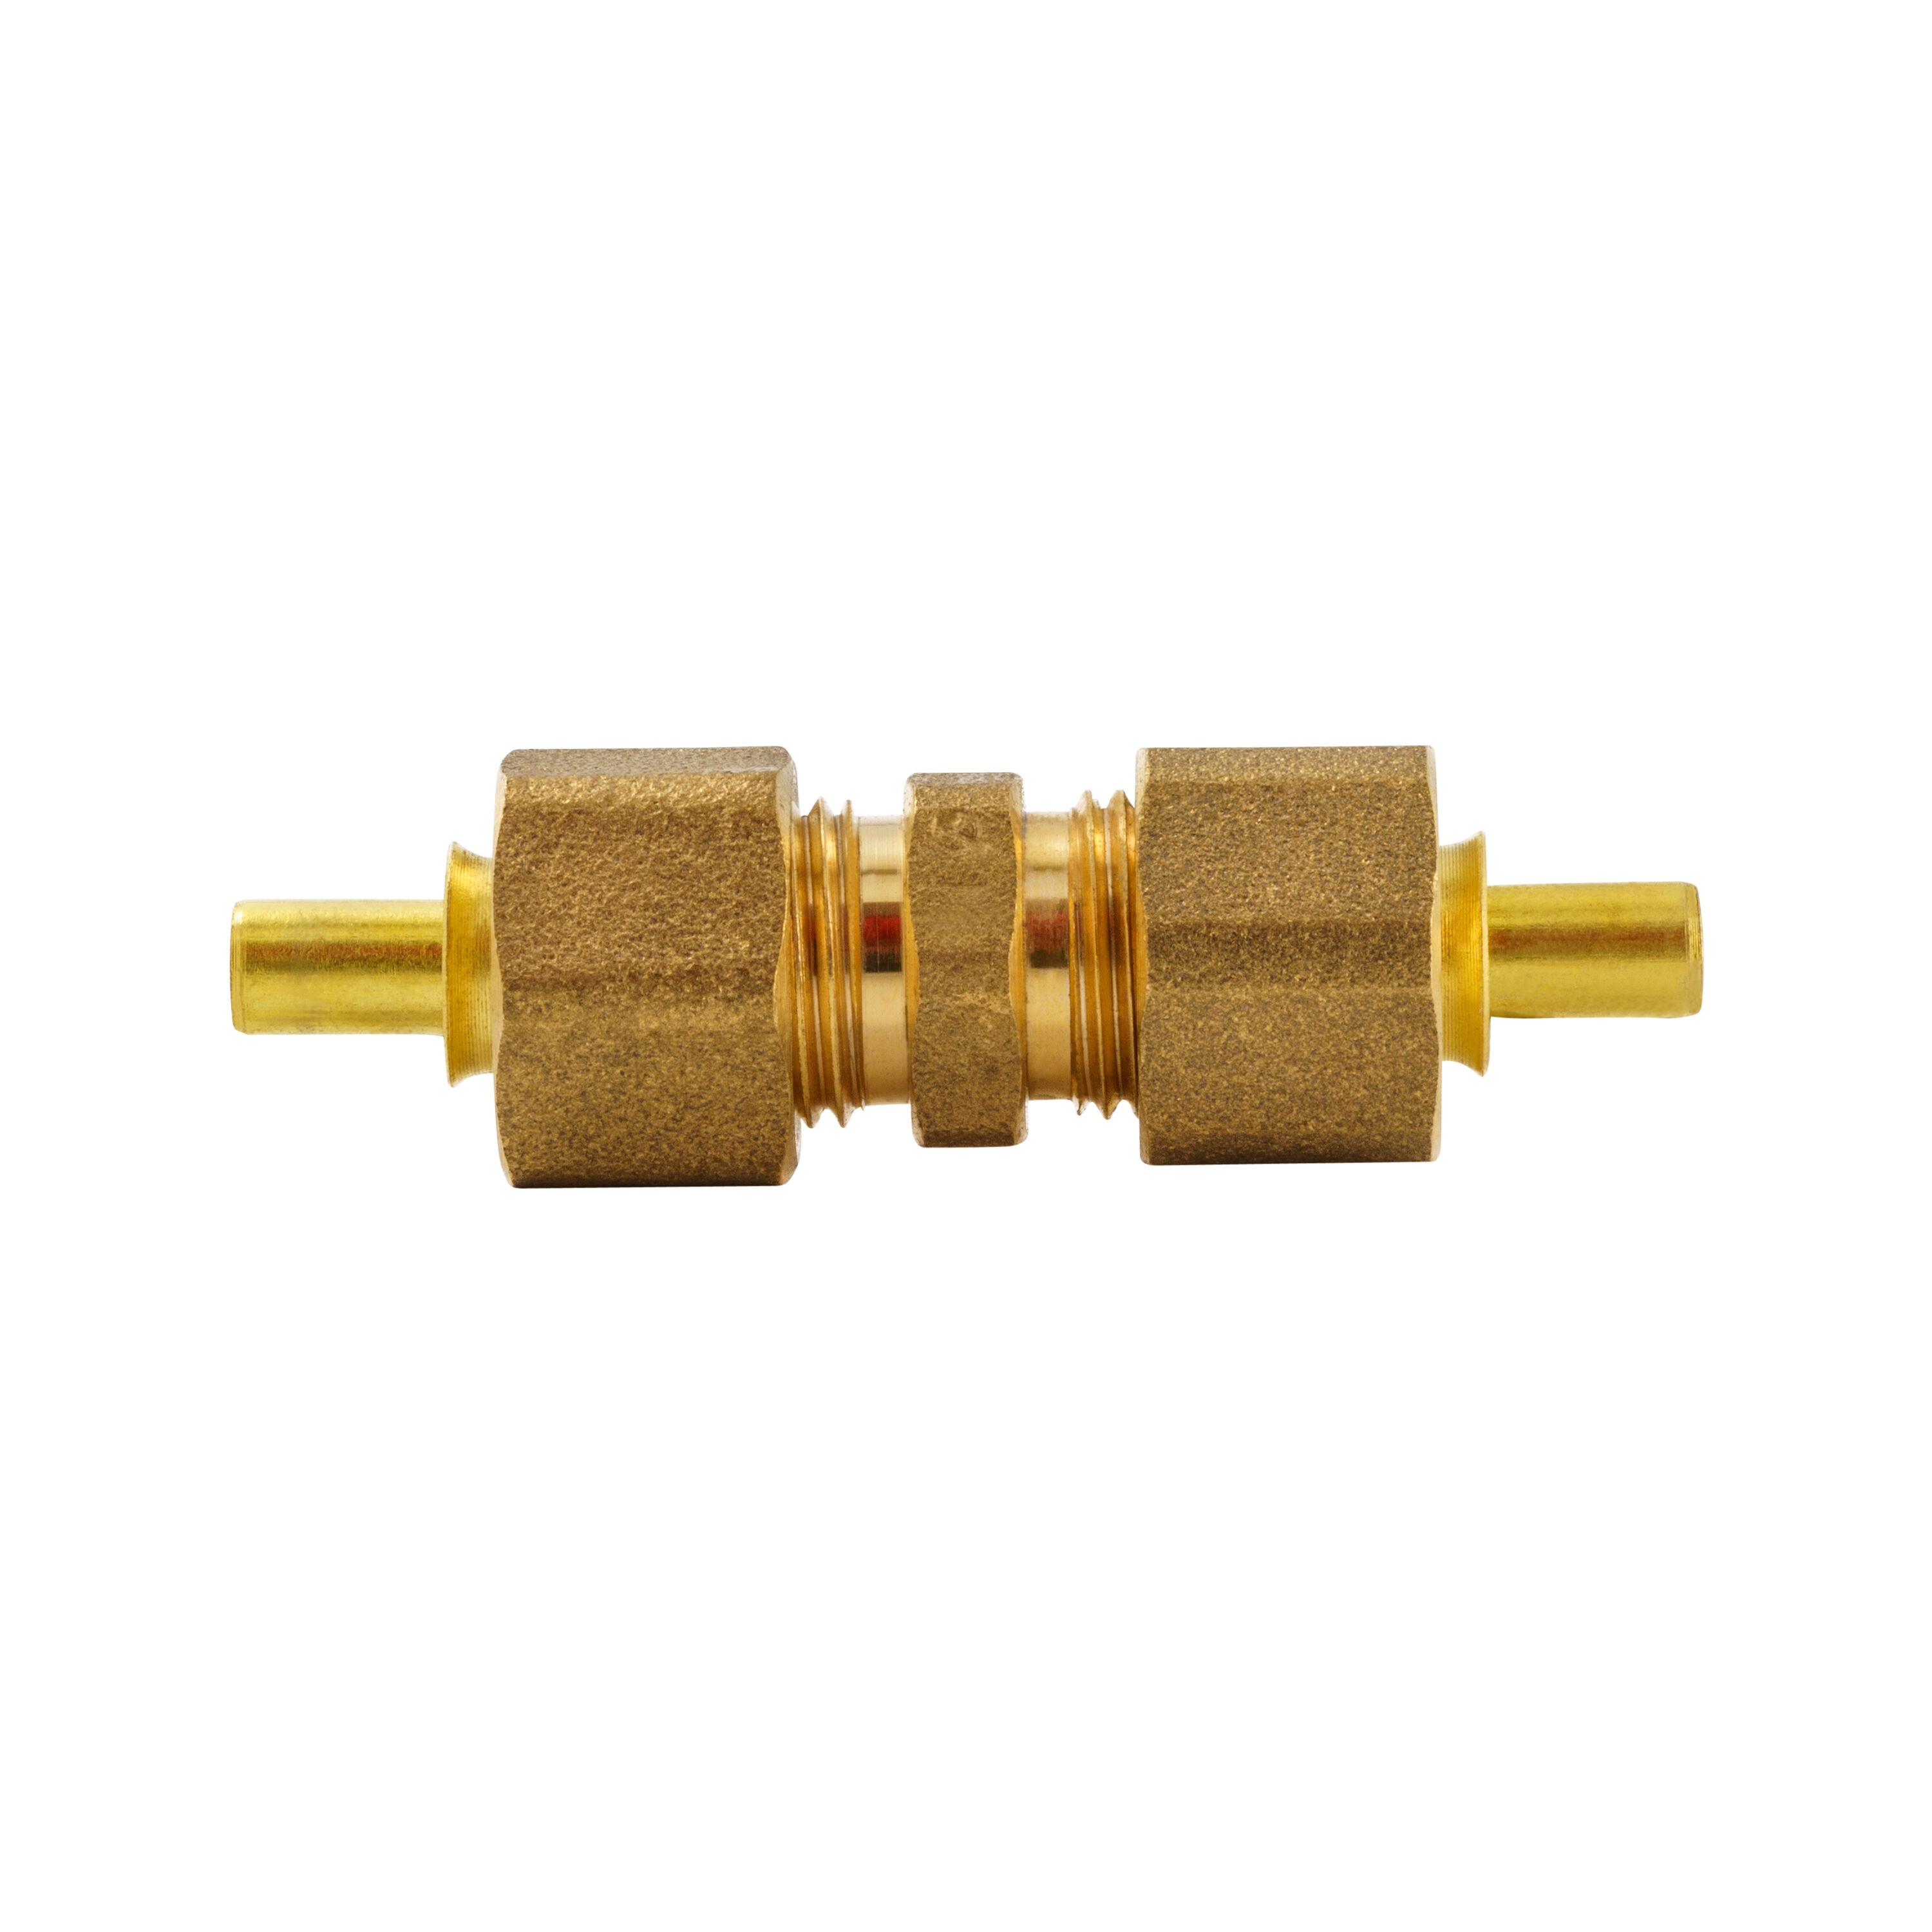 Proline Series 1/4-in x 1/4-in Compression Elbow Fitting in the Brass  Fittings department at